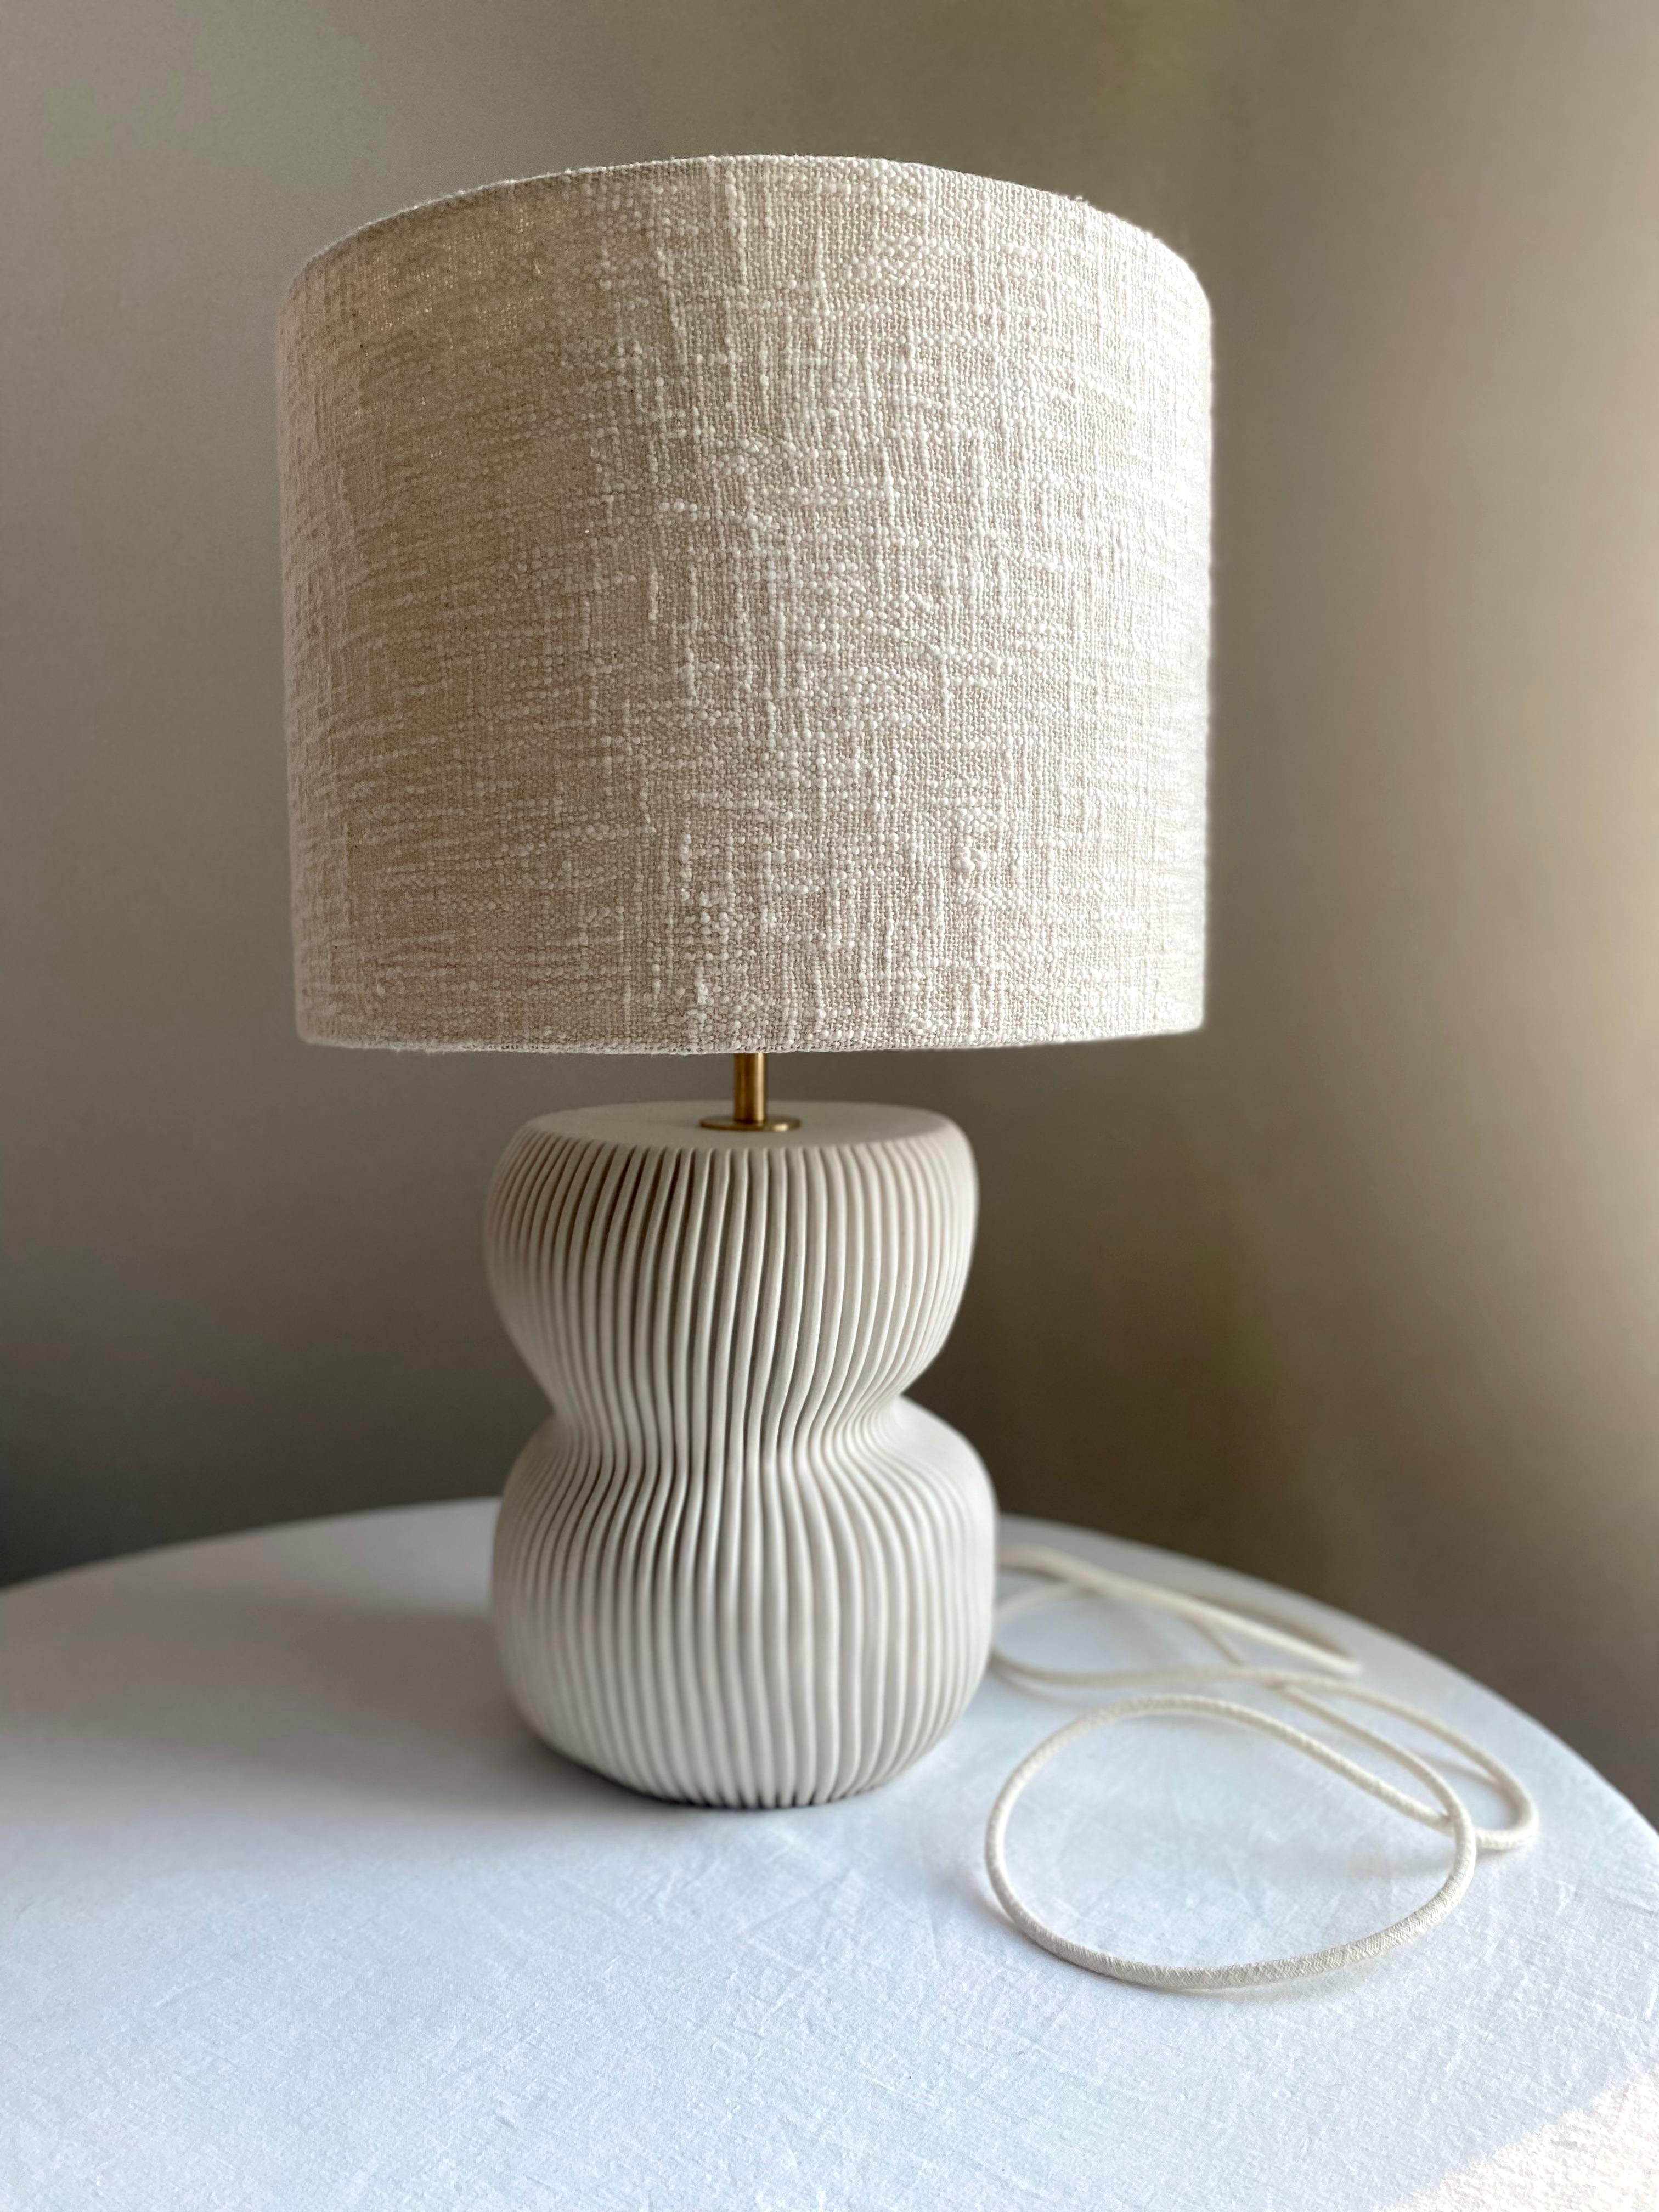 Handcrafted 'Organic Modern’ Table Lamp.

This sculptural table lamp is hand made from domestic porcelain, sculpted and carved using multiple techniques to achieve a vitreous, smooth finish.  
If you order a pair the dimensions and basic shape will